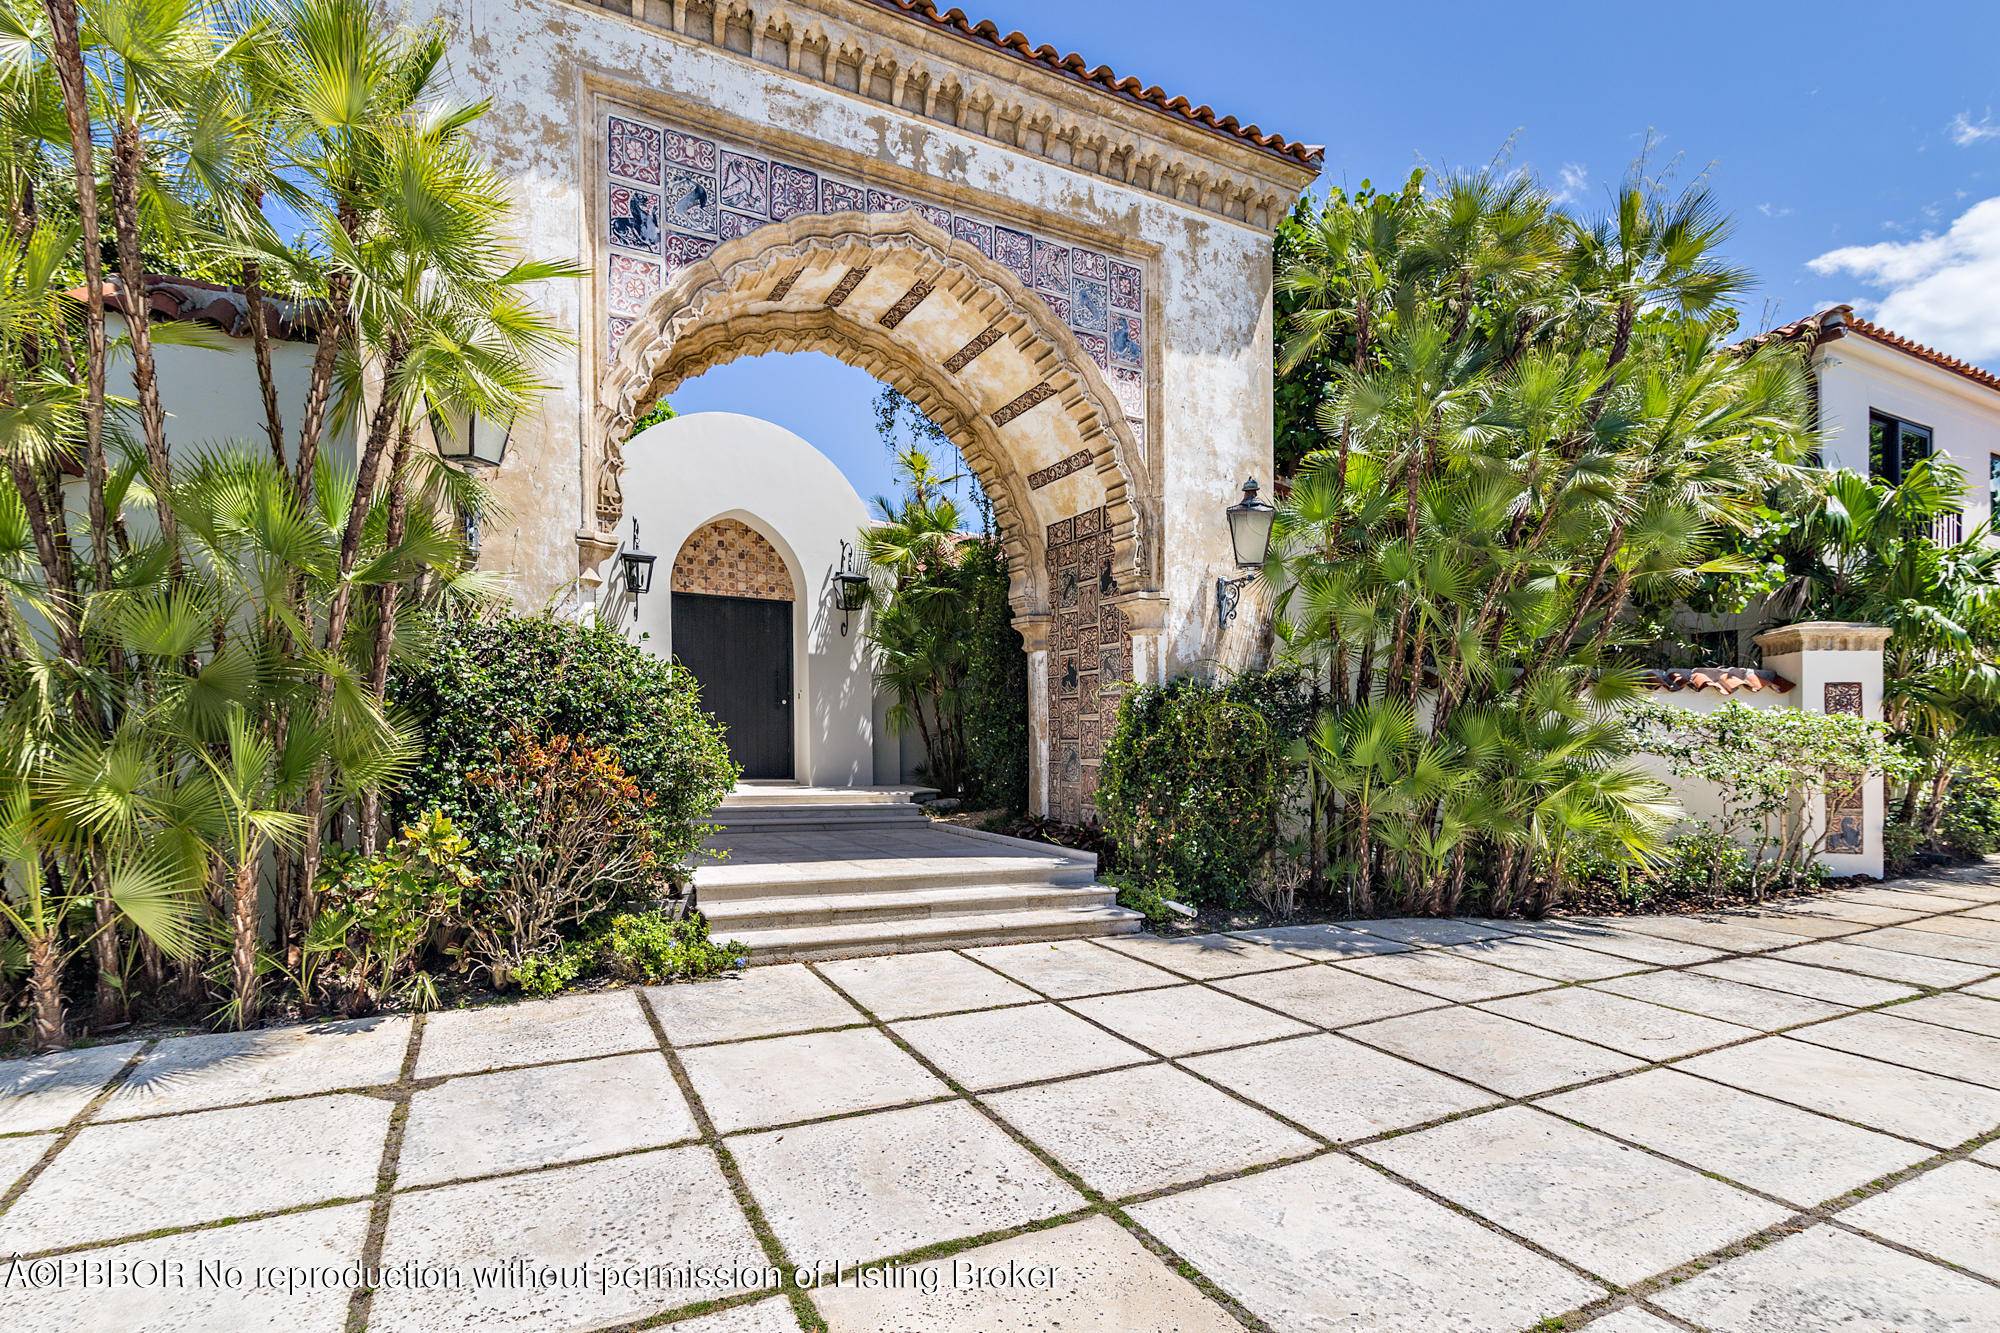 A rare offering of a significant Palm Beach property featuring the historic Fatio tiled entrance arch from the iconic Stotesbury Estate, ''El Mirasol.